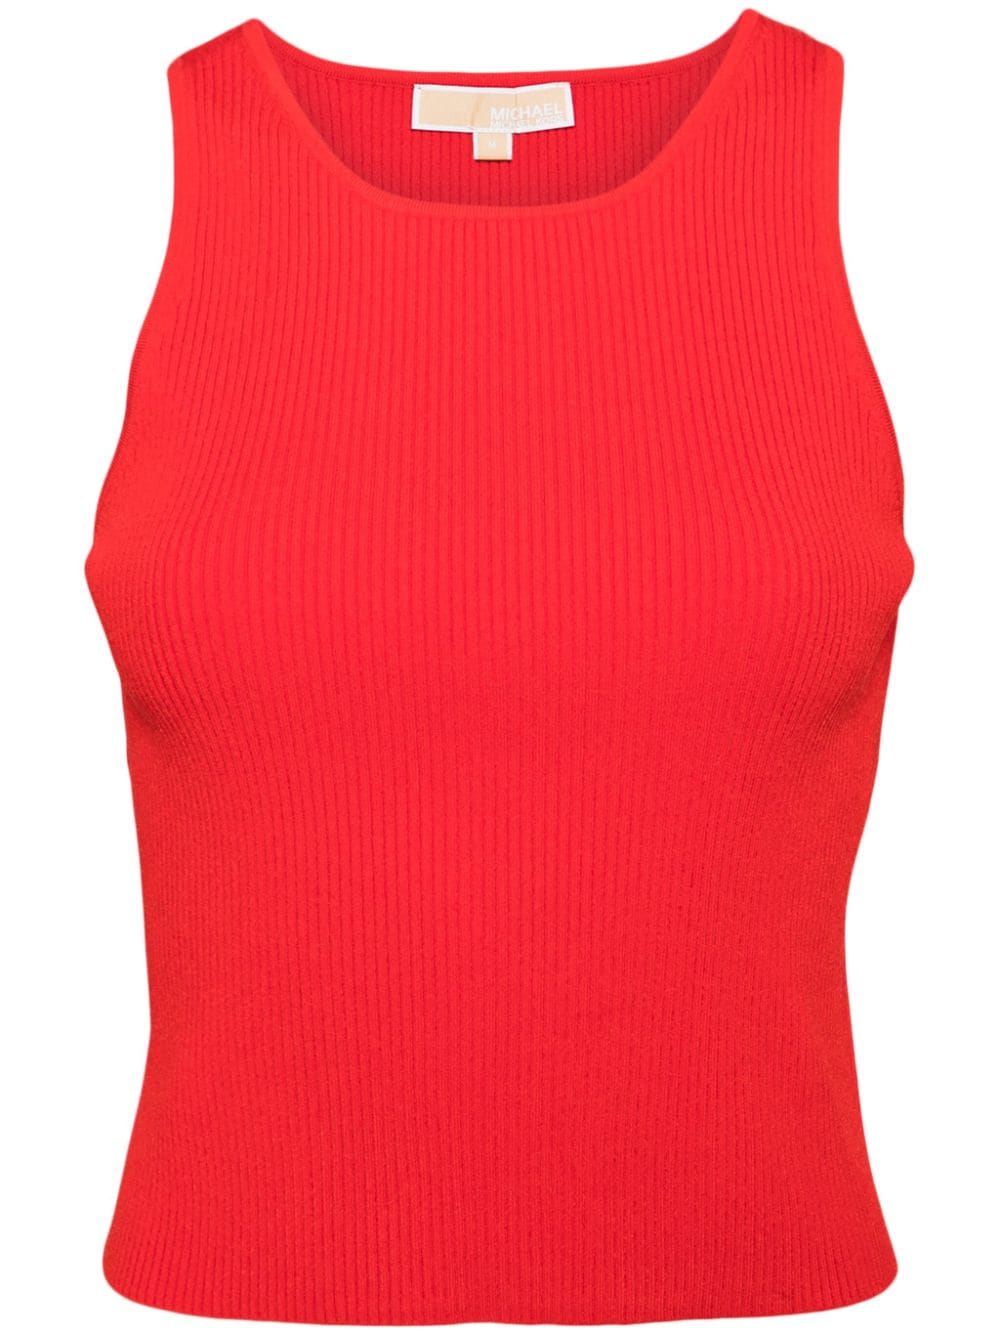 Michael Kors ribbed cropped top - Red von Michael Kors